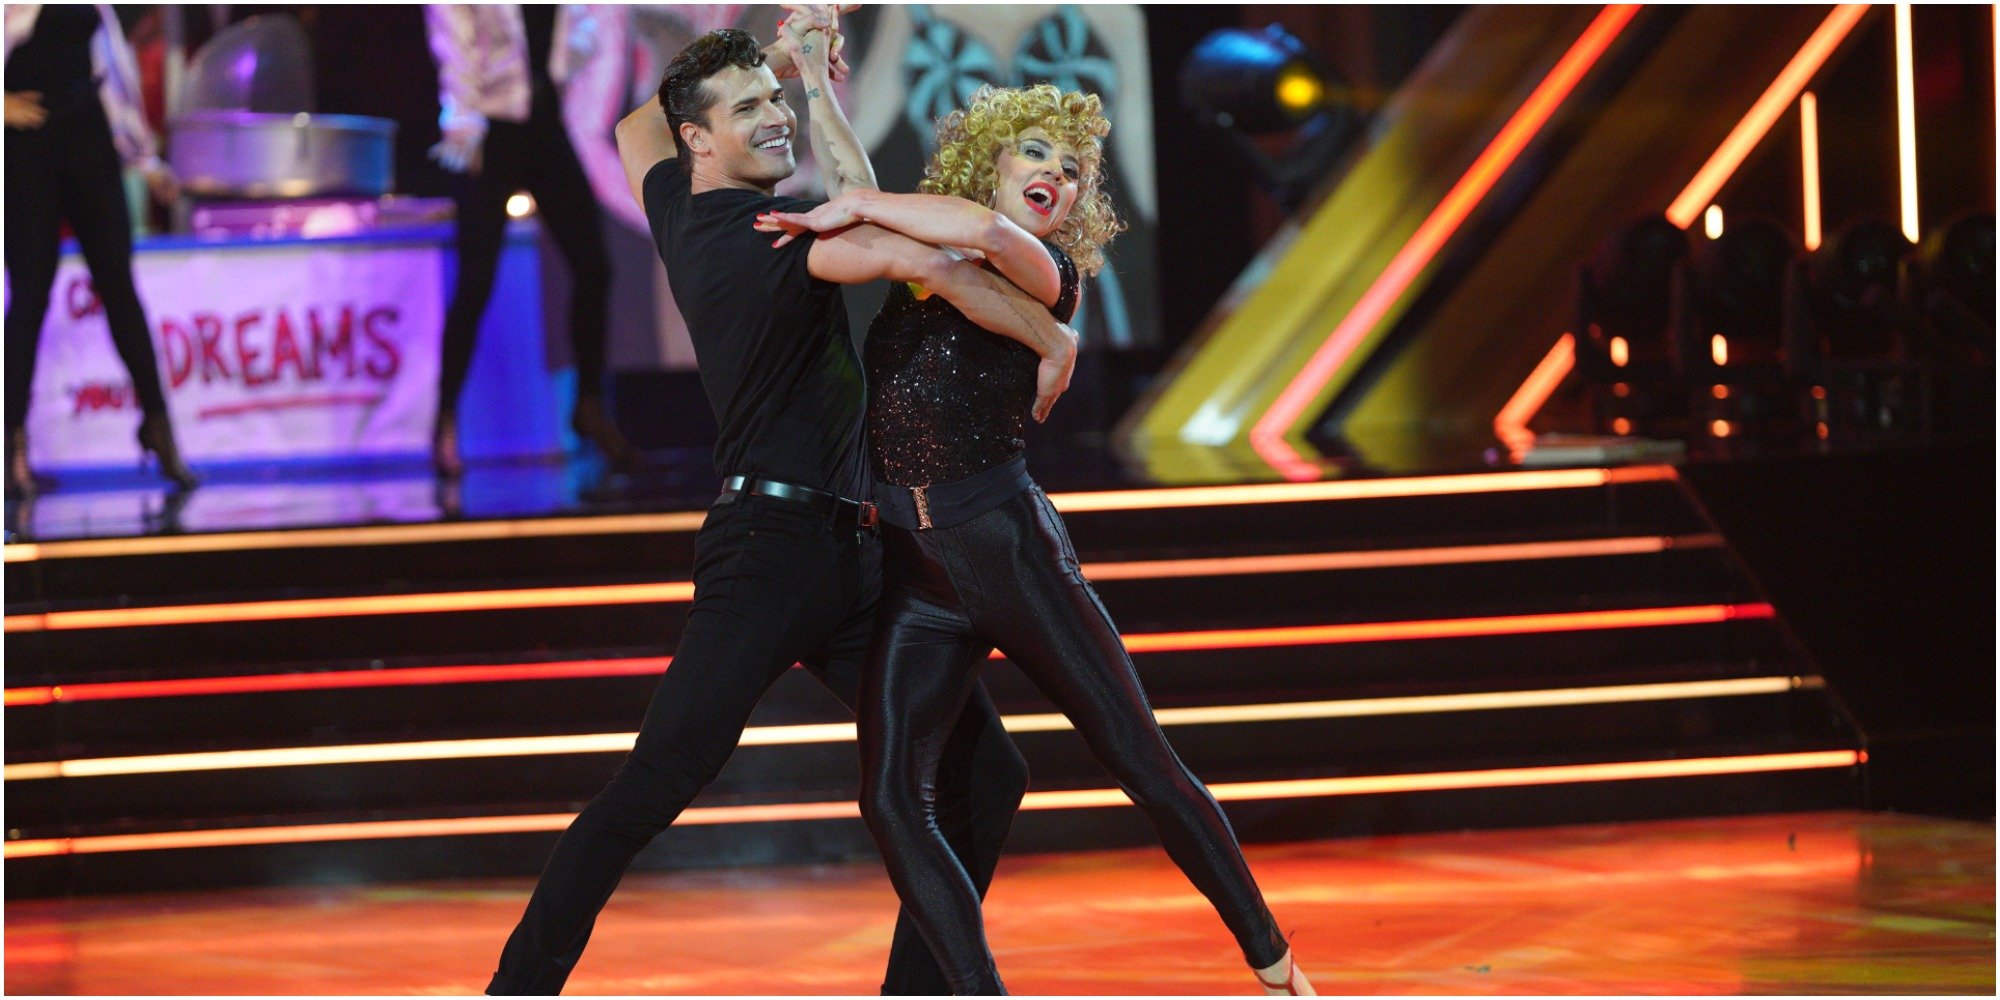 ‘Dancing with the Stars’: Mel C ‘Gutted’ Over Shocking ‘Grease Night’ Elimination